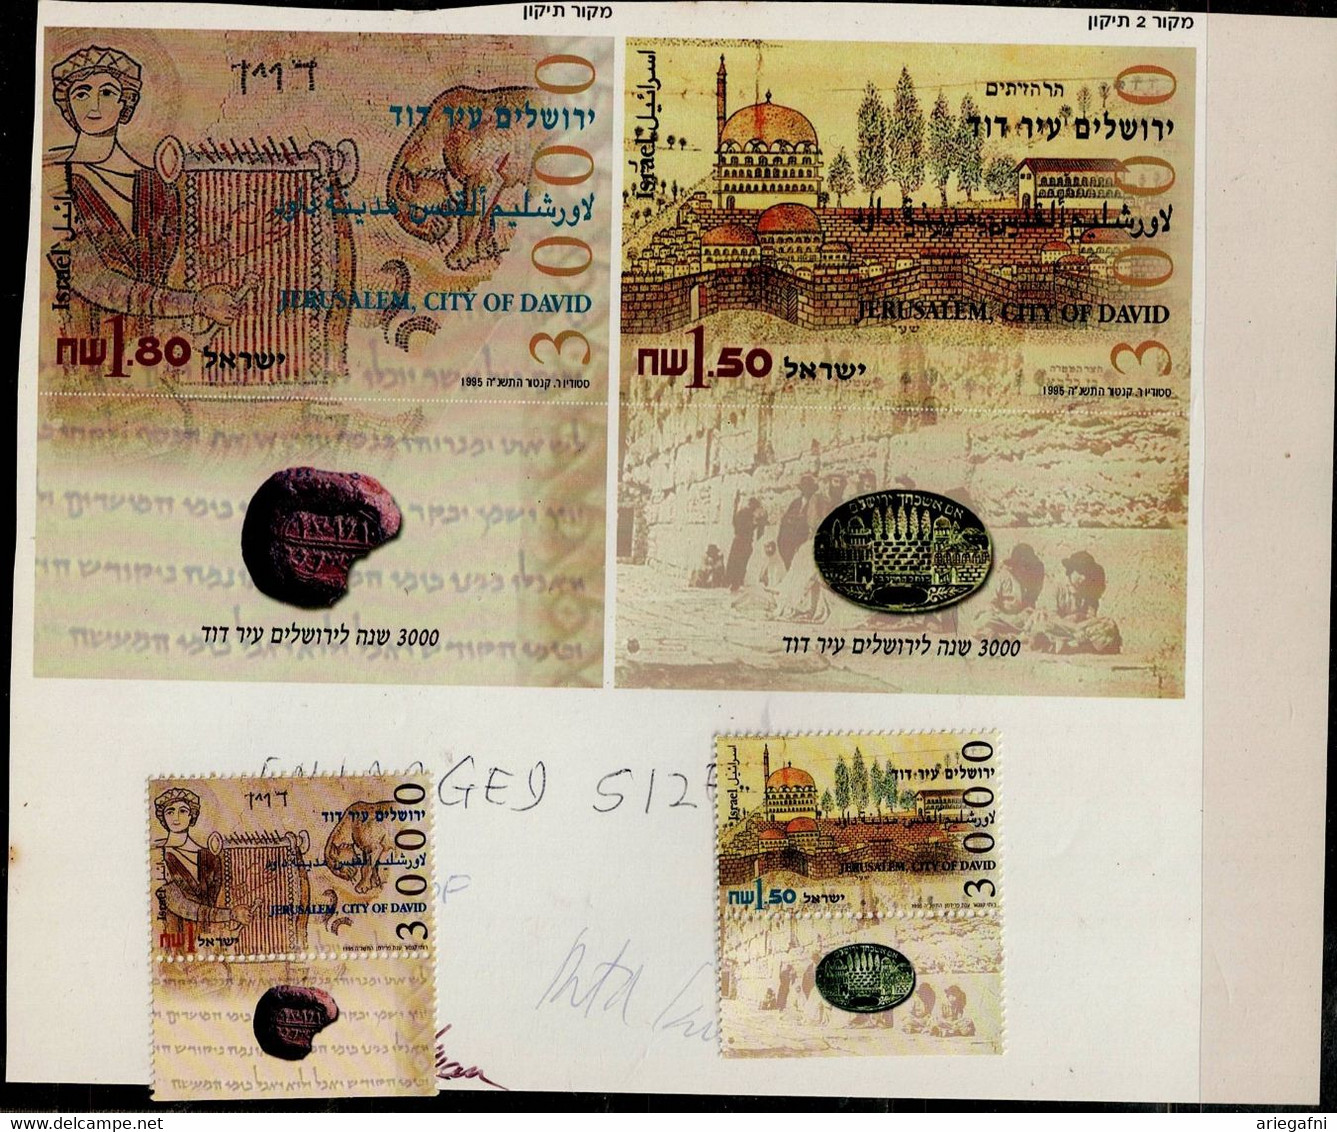 ISRAEL 1995 JERUSALEM 3000 YEARS STAMP PROOF VF!! - Imperforates, Proofs & Errors